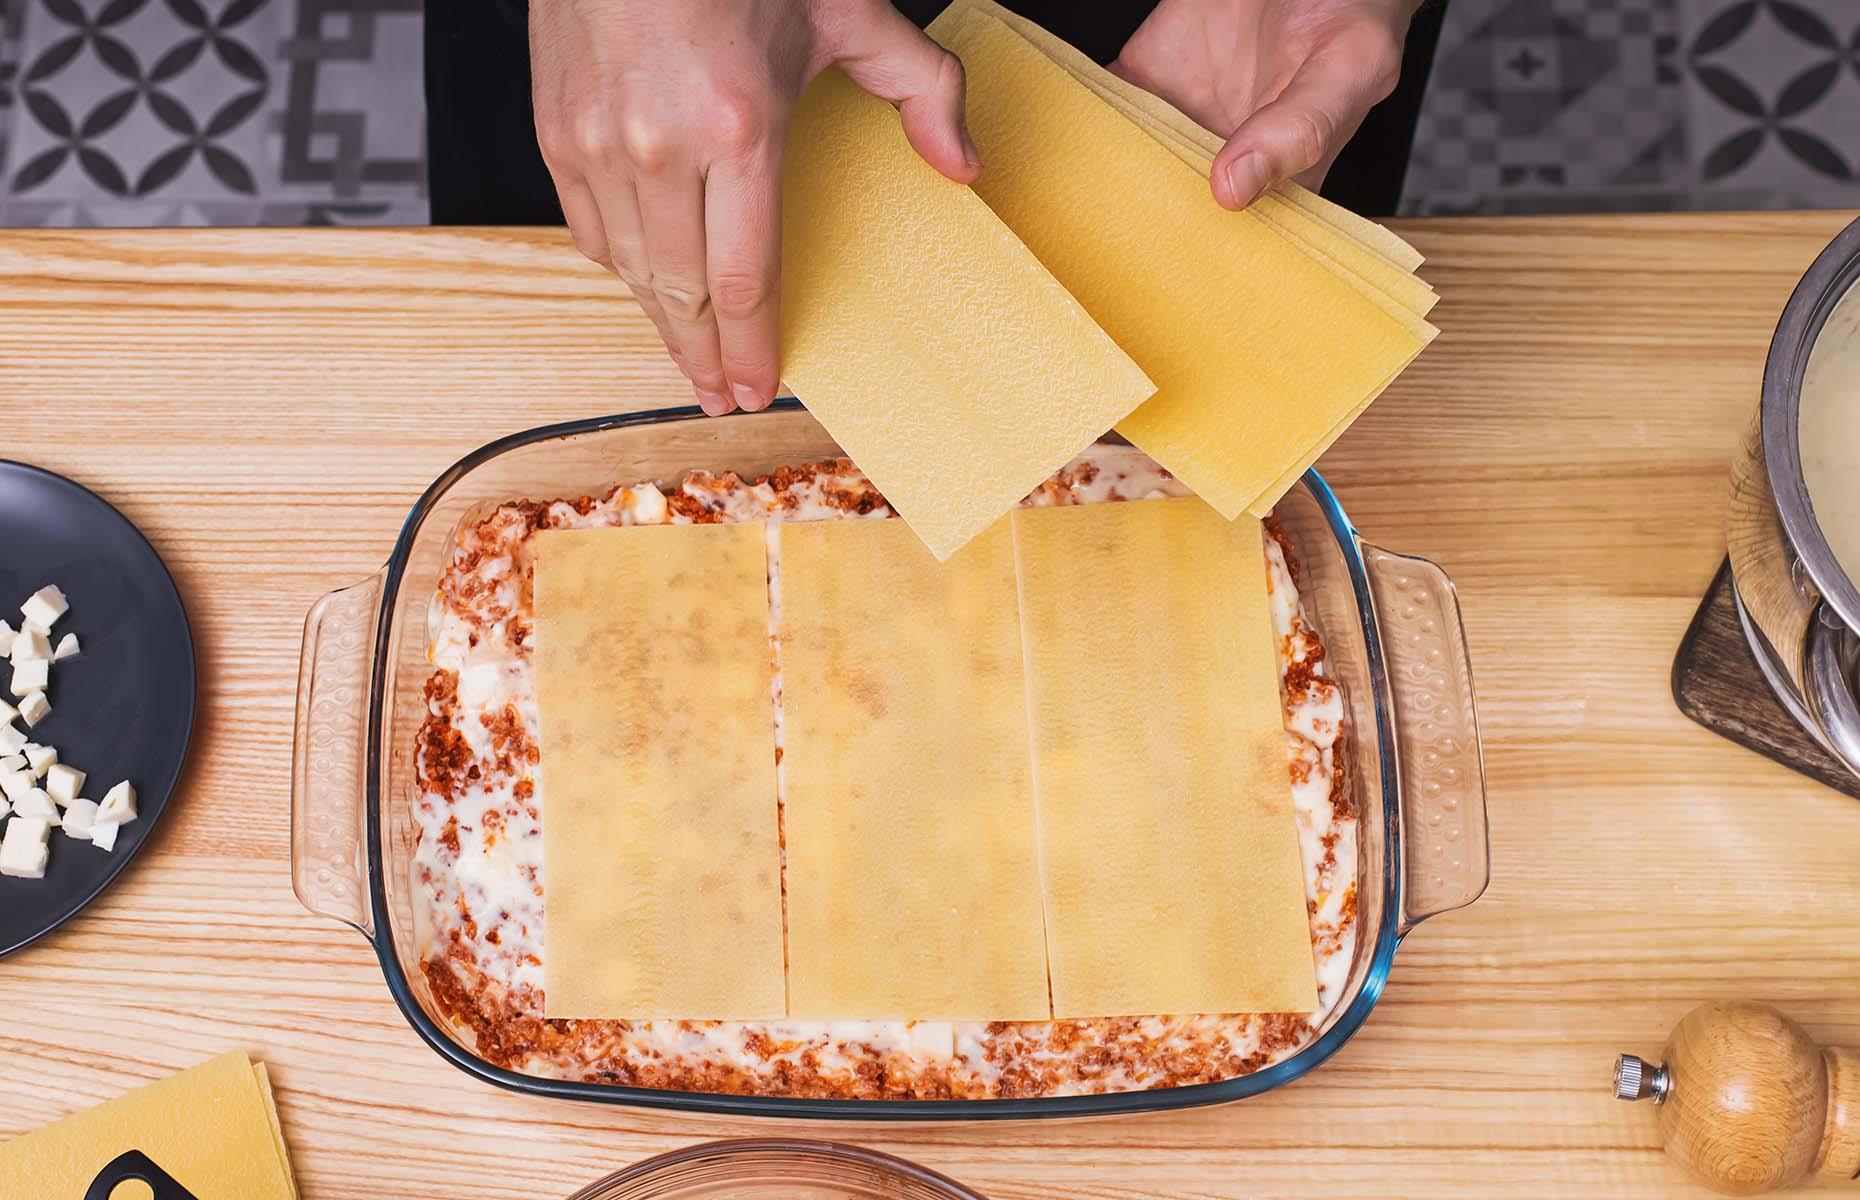 30 failsafe tips for making the best lasagne of your life